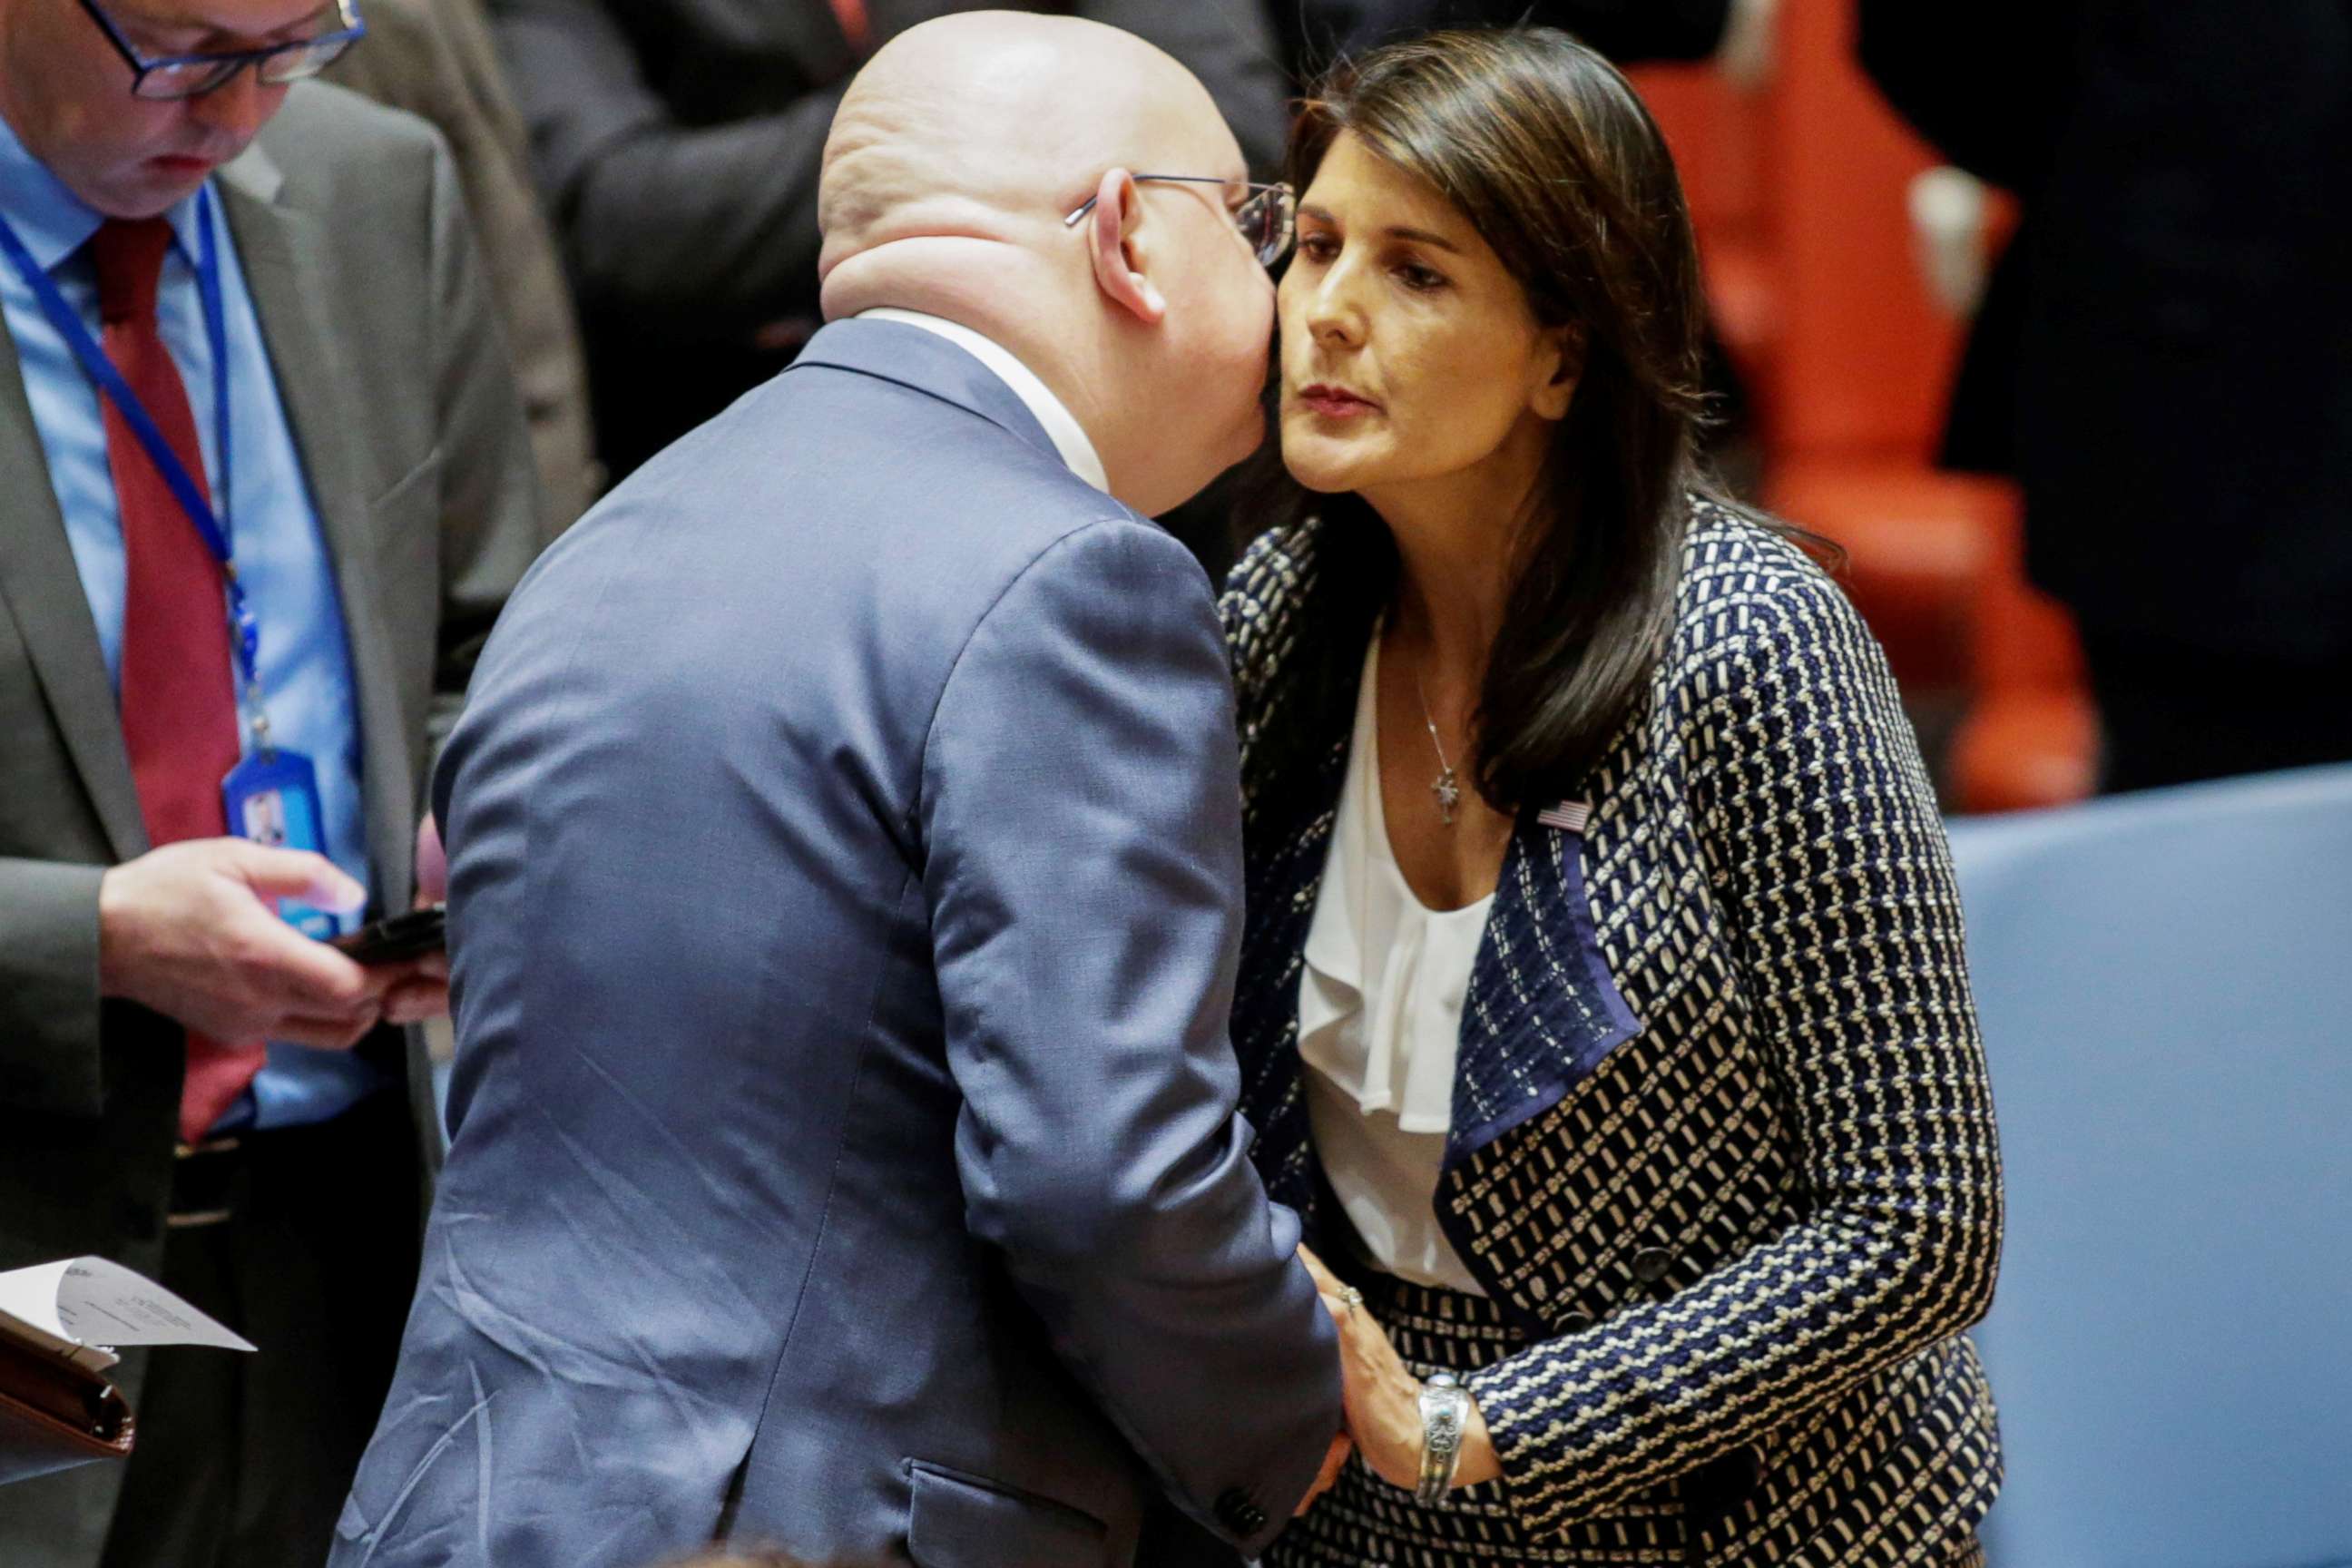 PHOTO: United States Ambassador to the United Nations Nikki Haley greets Russian Ambassador to the United Nations Vasily Nebenzya before the United Nations Security Council meeting on Syria at the U.N. headquarters in New York, April 13, 2018.